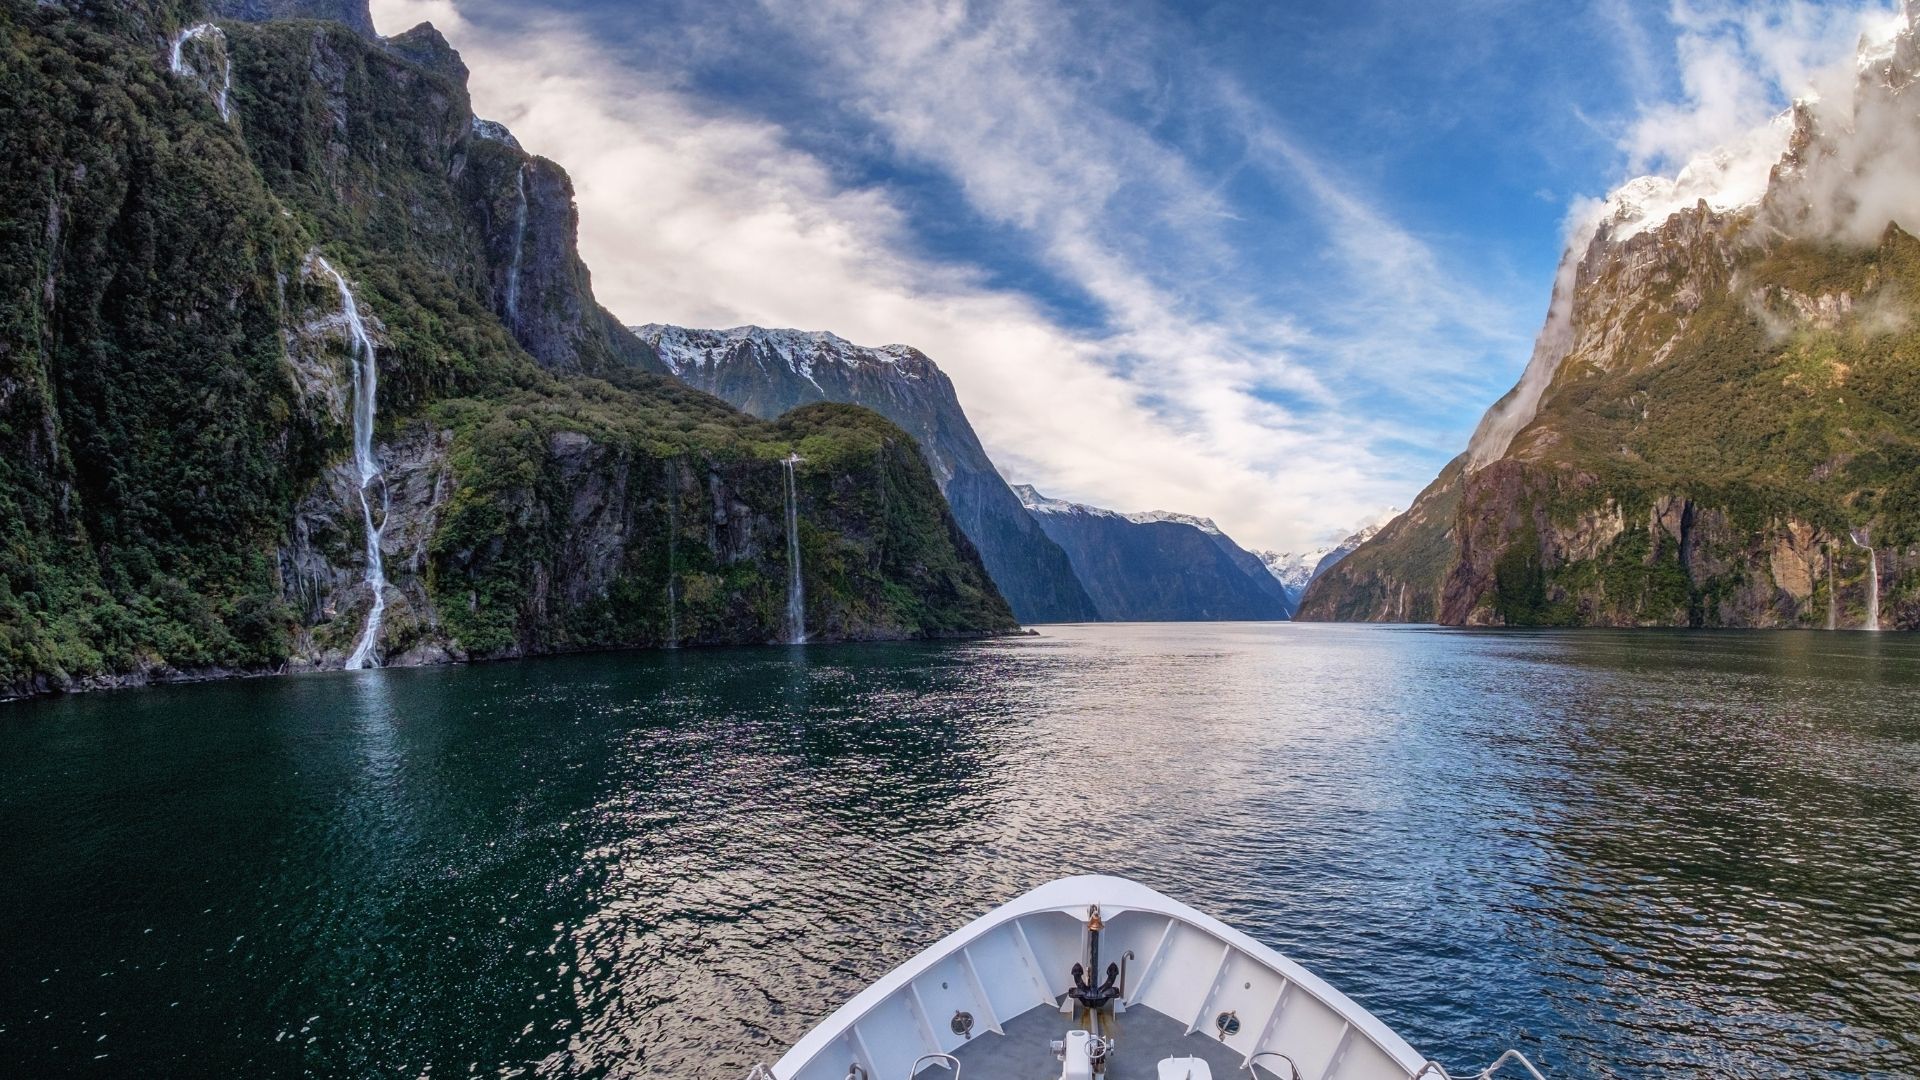 New Zealand Cruises the Ultimate Guide for a Remarkable Trip Ellie's